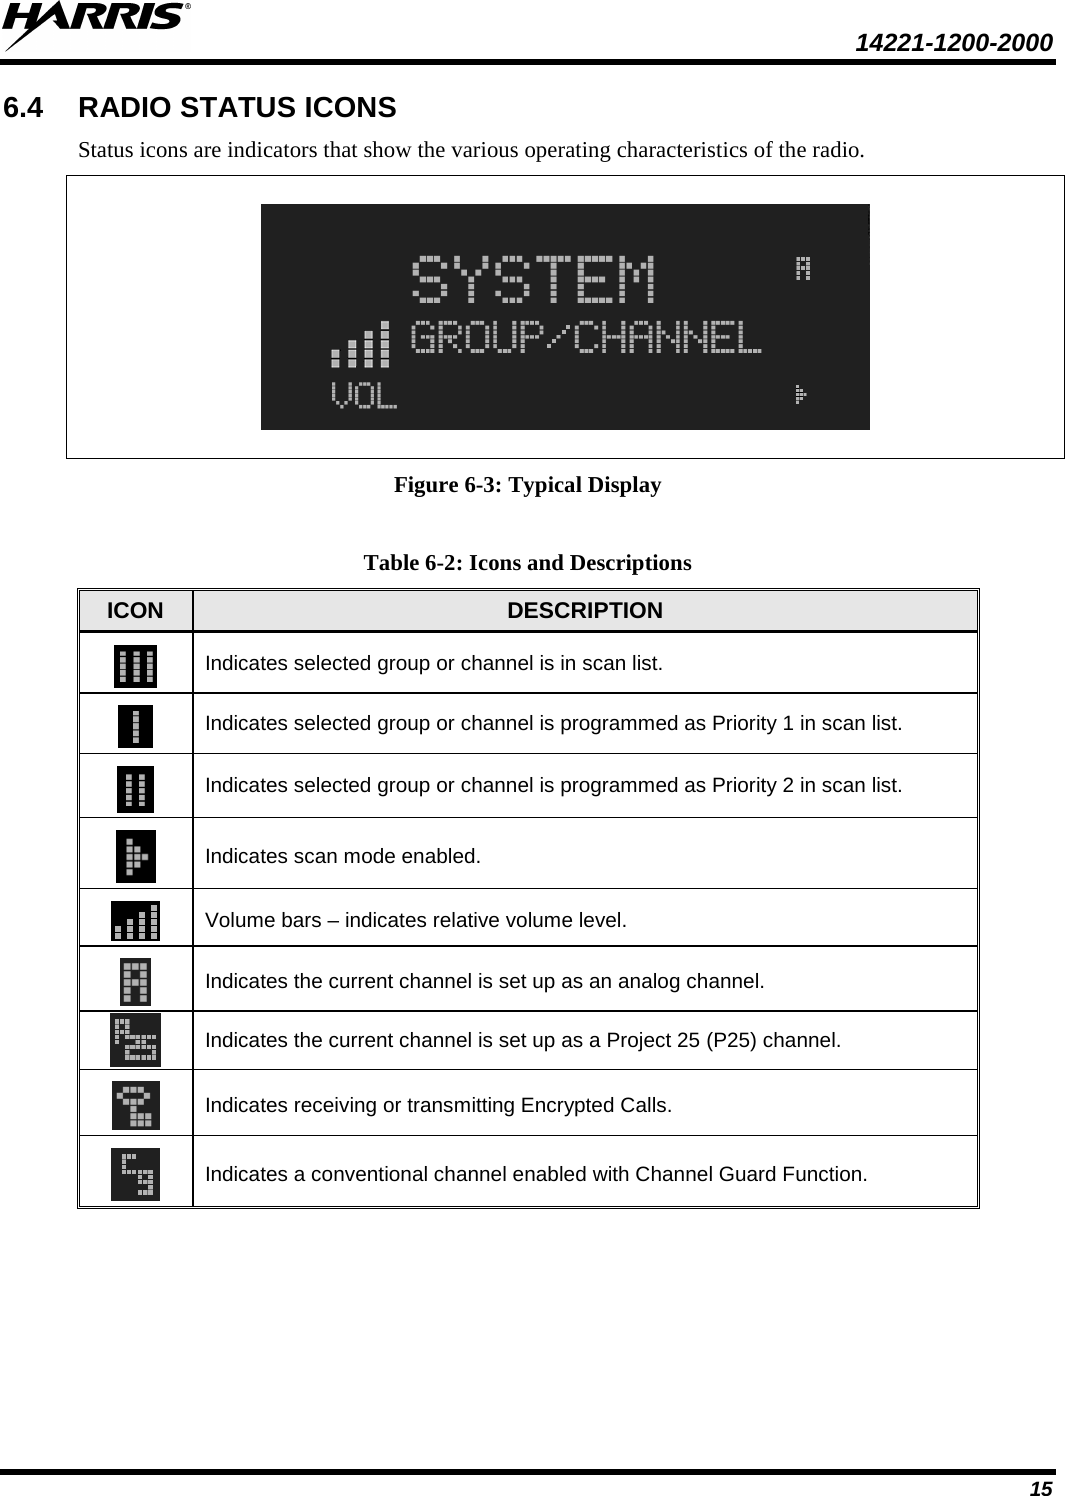  14221-1200-2000 15 6.4 RADIO STATUS ICONS Status icons are indicators that show the various operating characteristics of the radio.      Figure 6-3: Typical Display  Table 6-2: Icons and Descriptions ICON DESCRIPTION  Indicates selected group or channel is in scan list.  Indicates selected group or channel is programmed as Priority 1 in scan list.  Indicates selected group or channel is programmed as Priority 2 in scan list.  Indicates scan mode enabled.  Volume bars – indicates relative volume level.  Indicates the current channel is set up as an analog channel.  Indicates the current channel is set up as a Project 25 (P25) channel.  Indicates receiving or transmitting Encrypted Calls.  Indicates a conventional channel enabled with Channel Guard Function. 